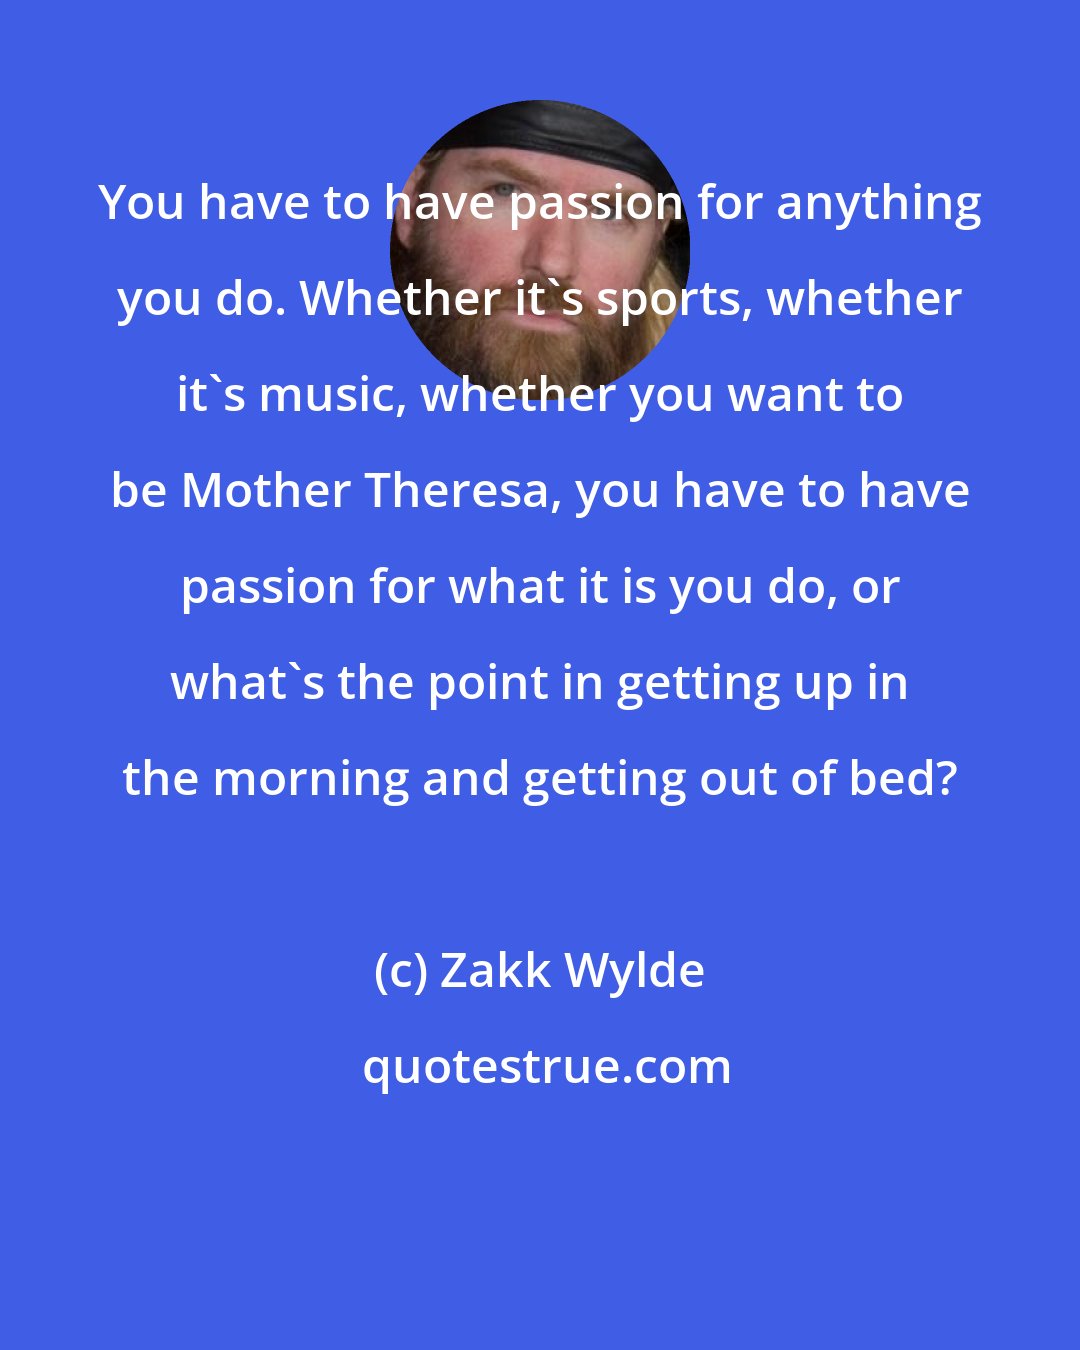 Zakk Wylde: You have to have passion for anything you do. Whether it's sports, whether it's music, whether you want to be Mother Theresa, you have to have passion for what it is you do, or what's the point in getting up in the morning and getting out of bed?